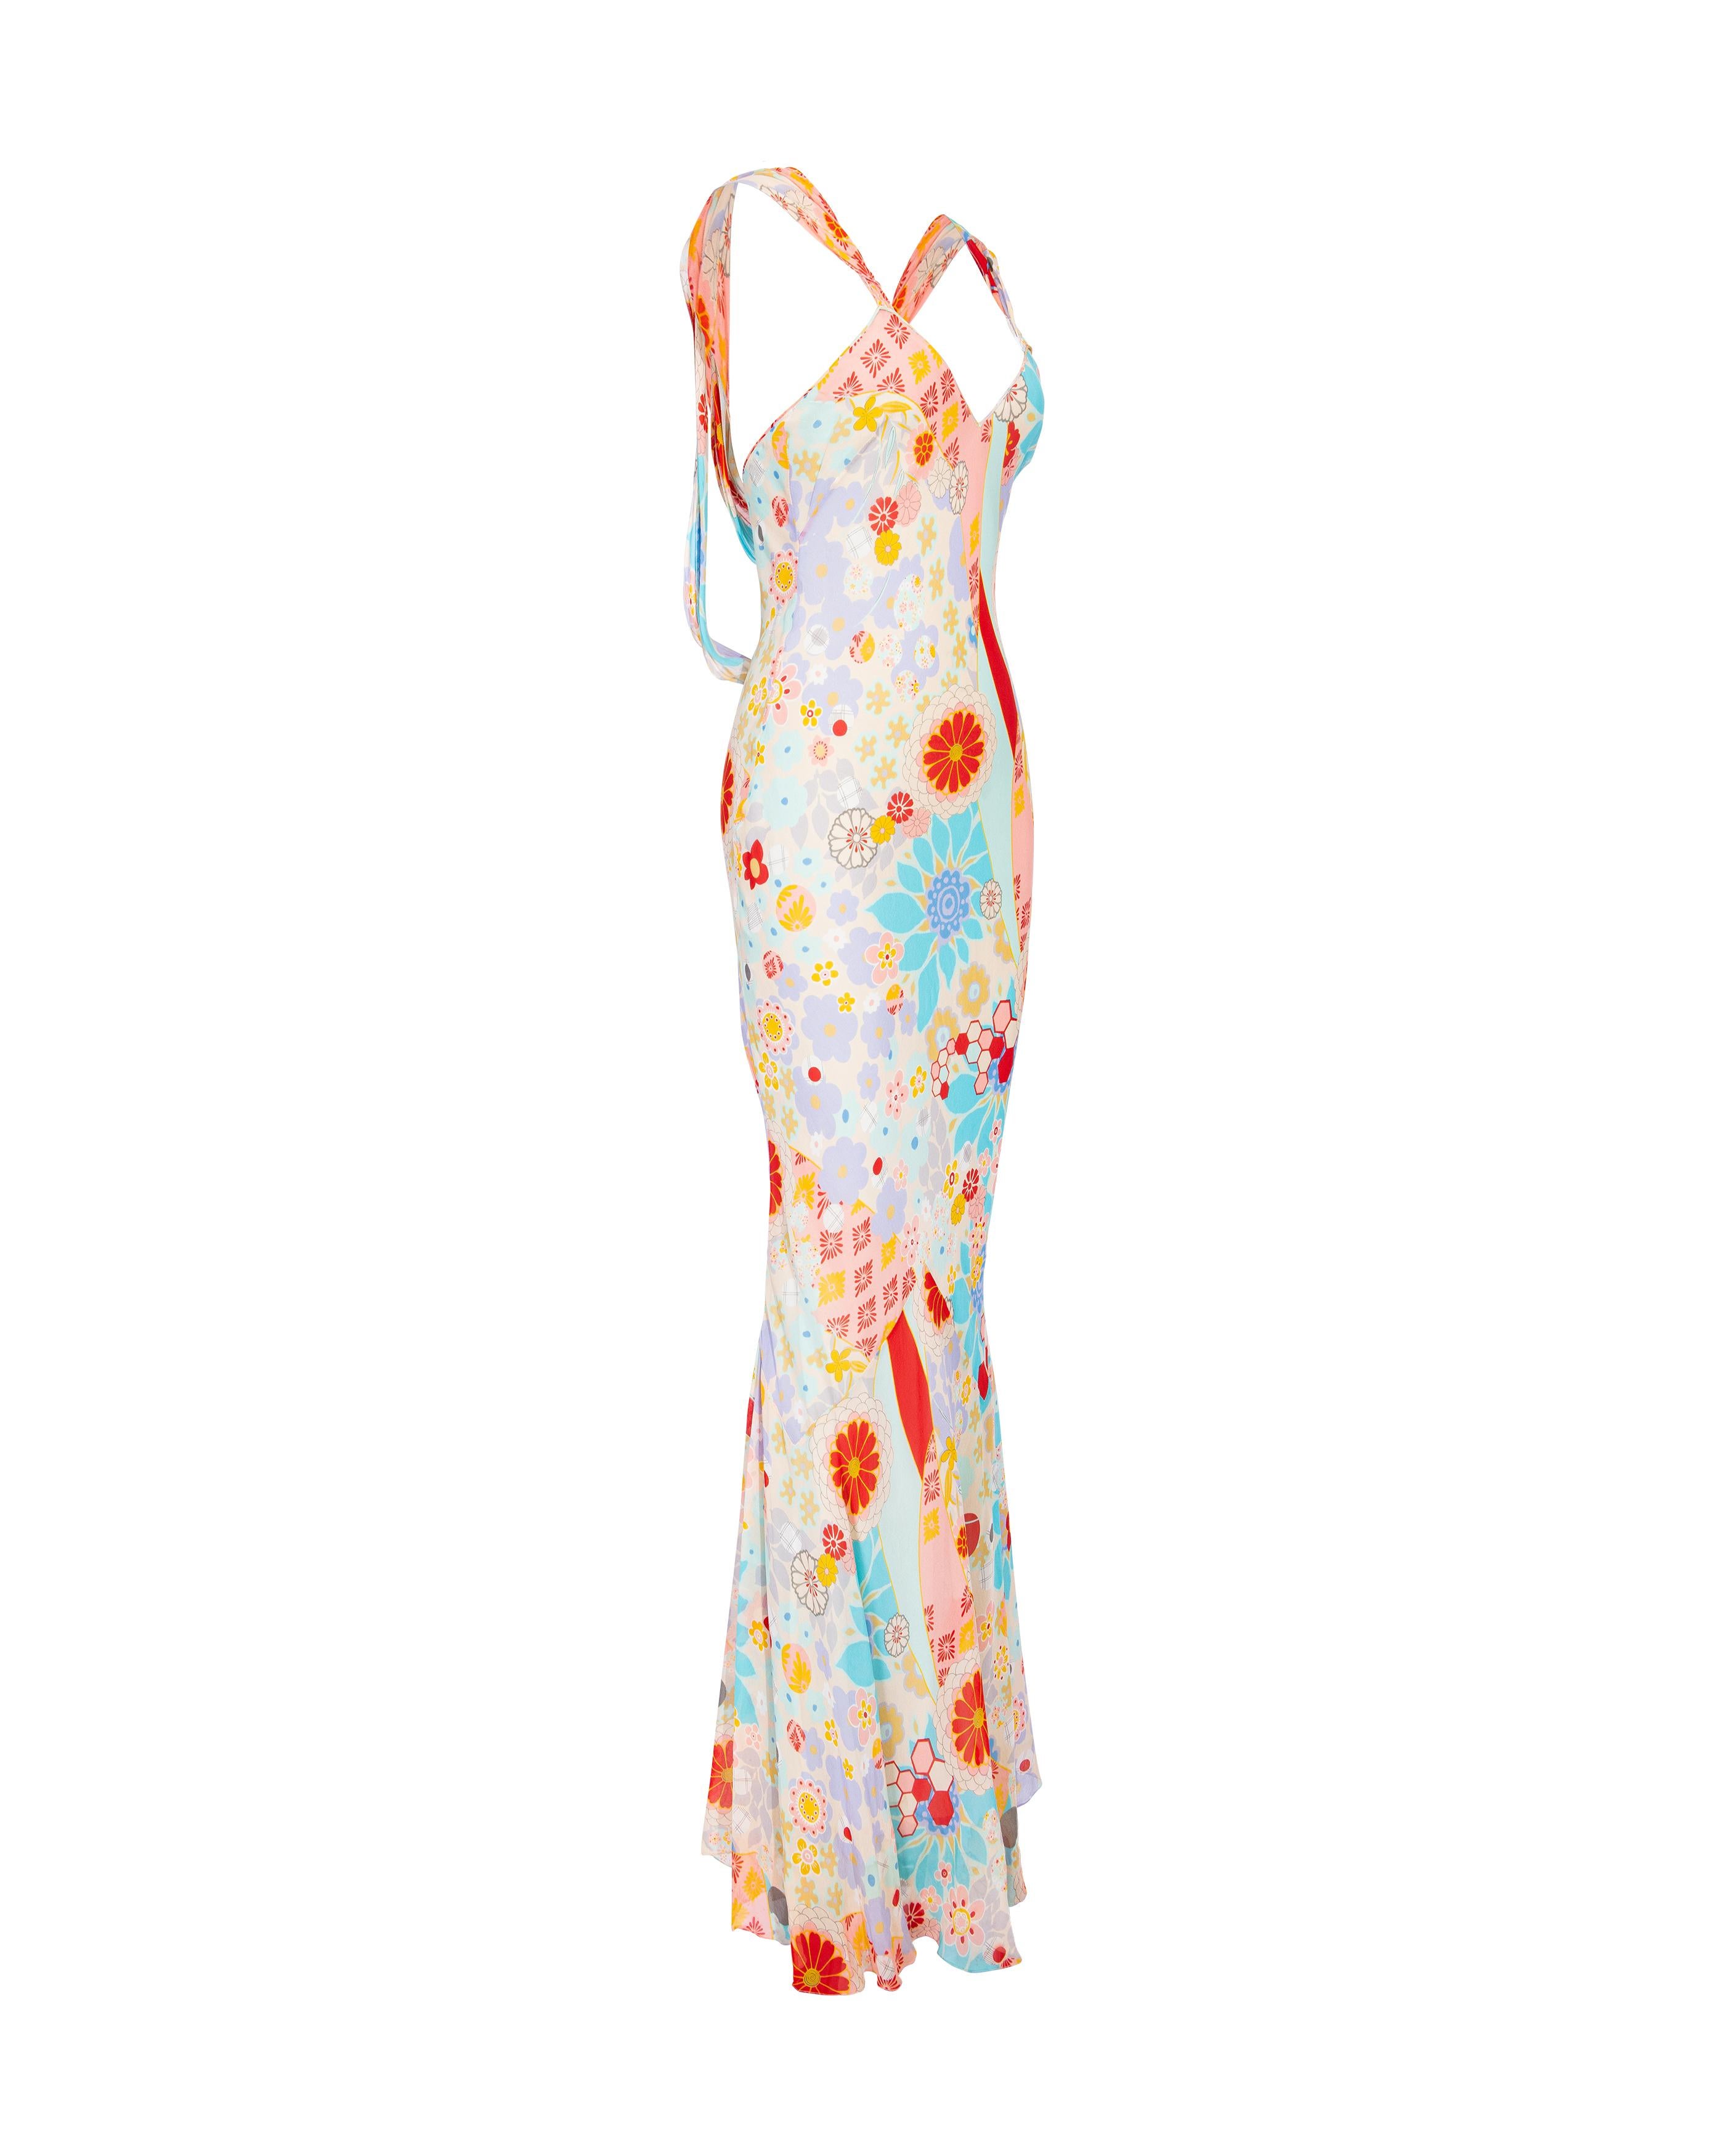 S/S 2006 John Galliano floral bias silk cut gown with back fabric button closure detail. Bias cut v-neck sleeveless gown with open drape back straps and long, full skirt. Multicolor bright floral pattern with geometric details. Back features